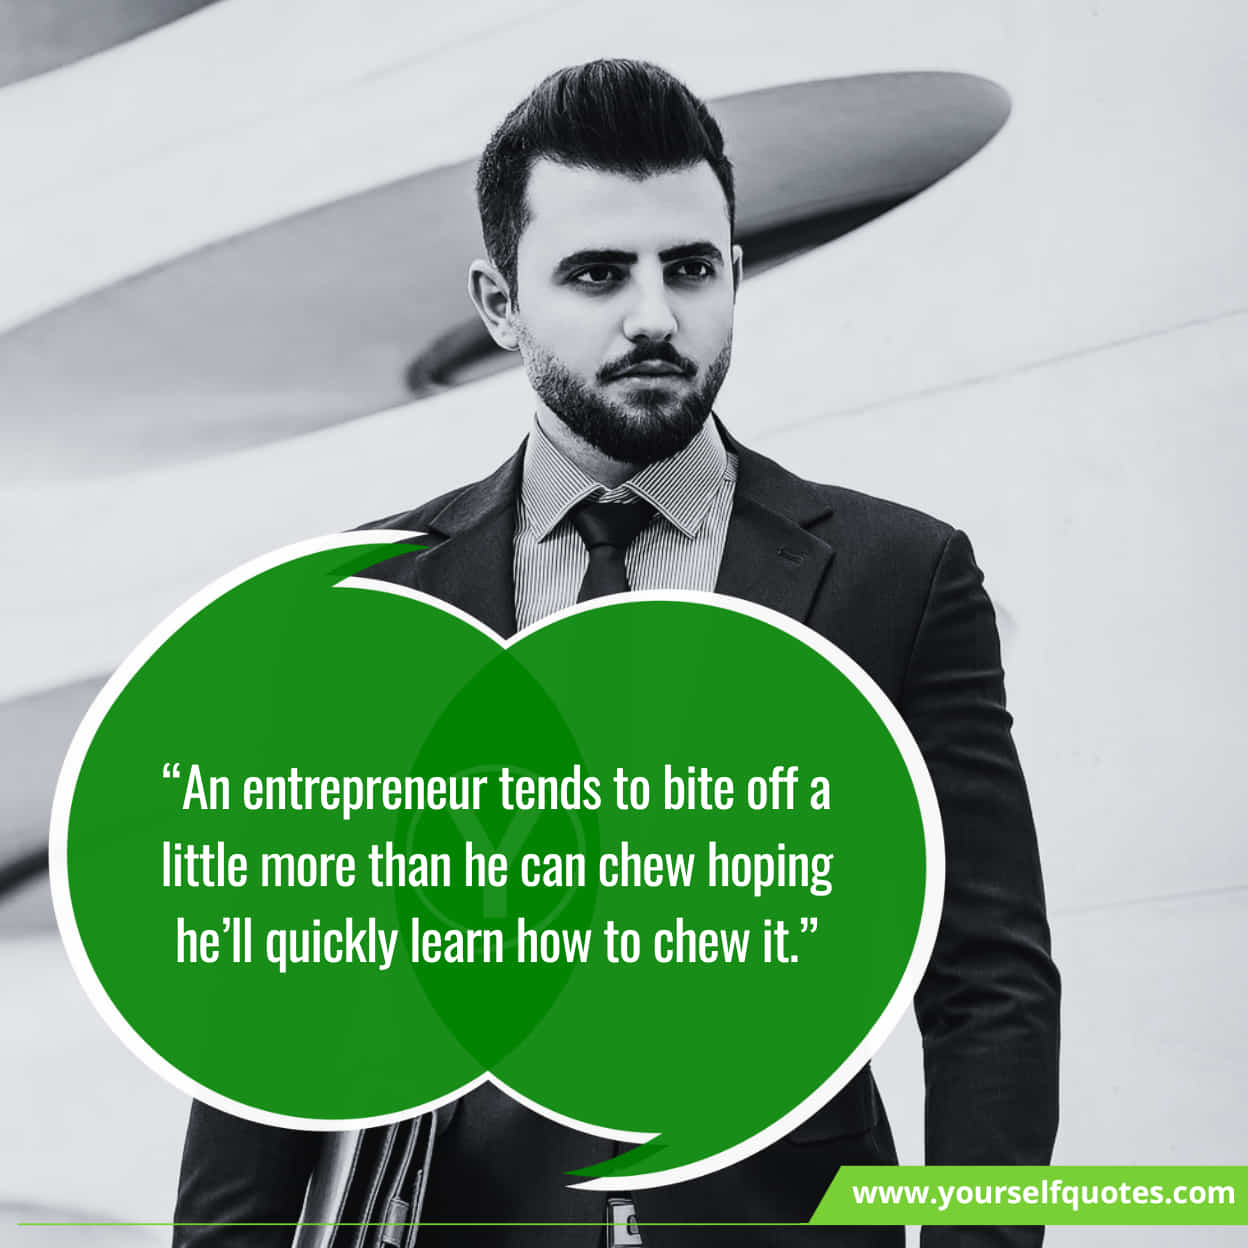 Best Quotes For Businessmen